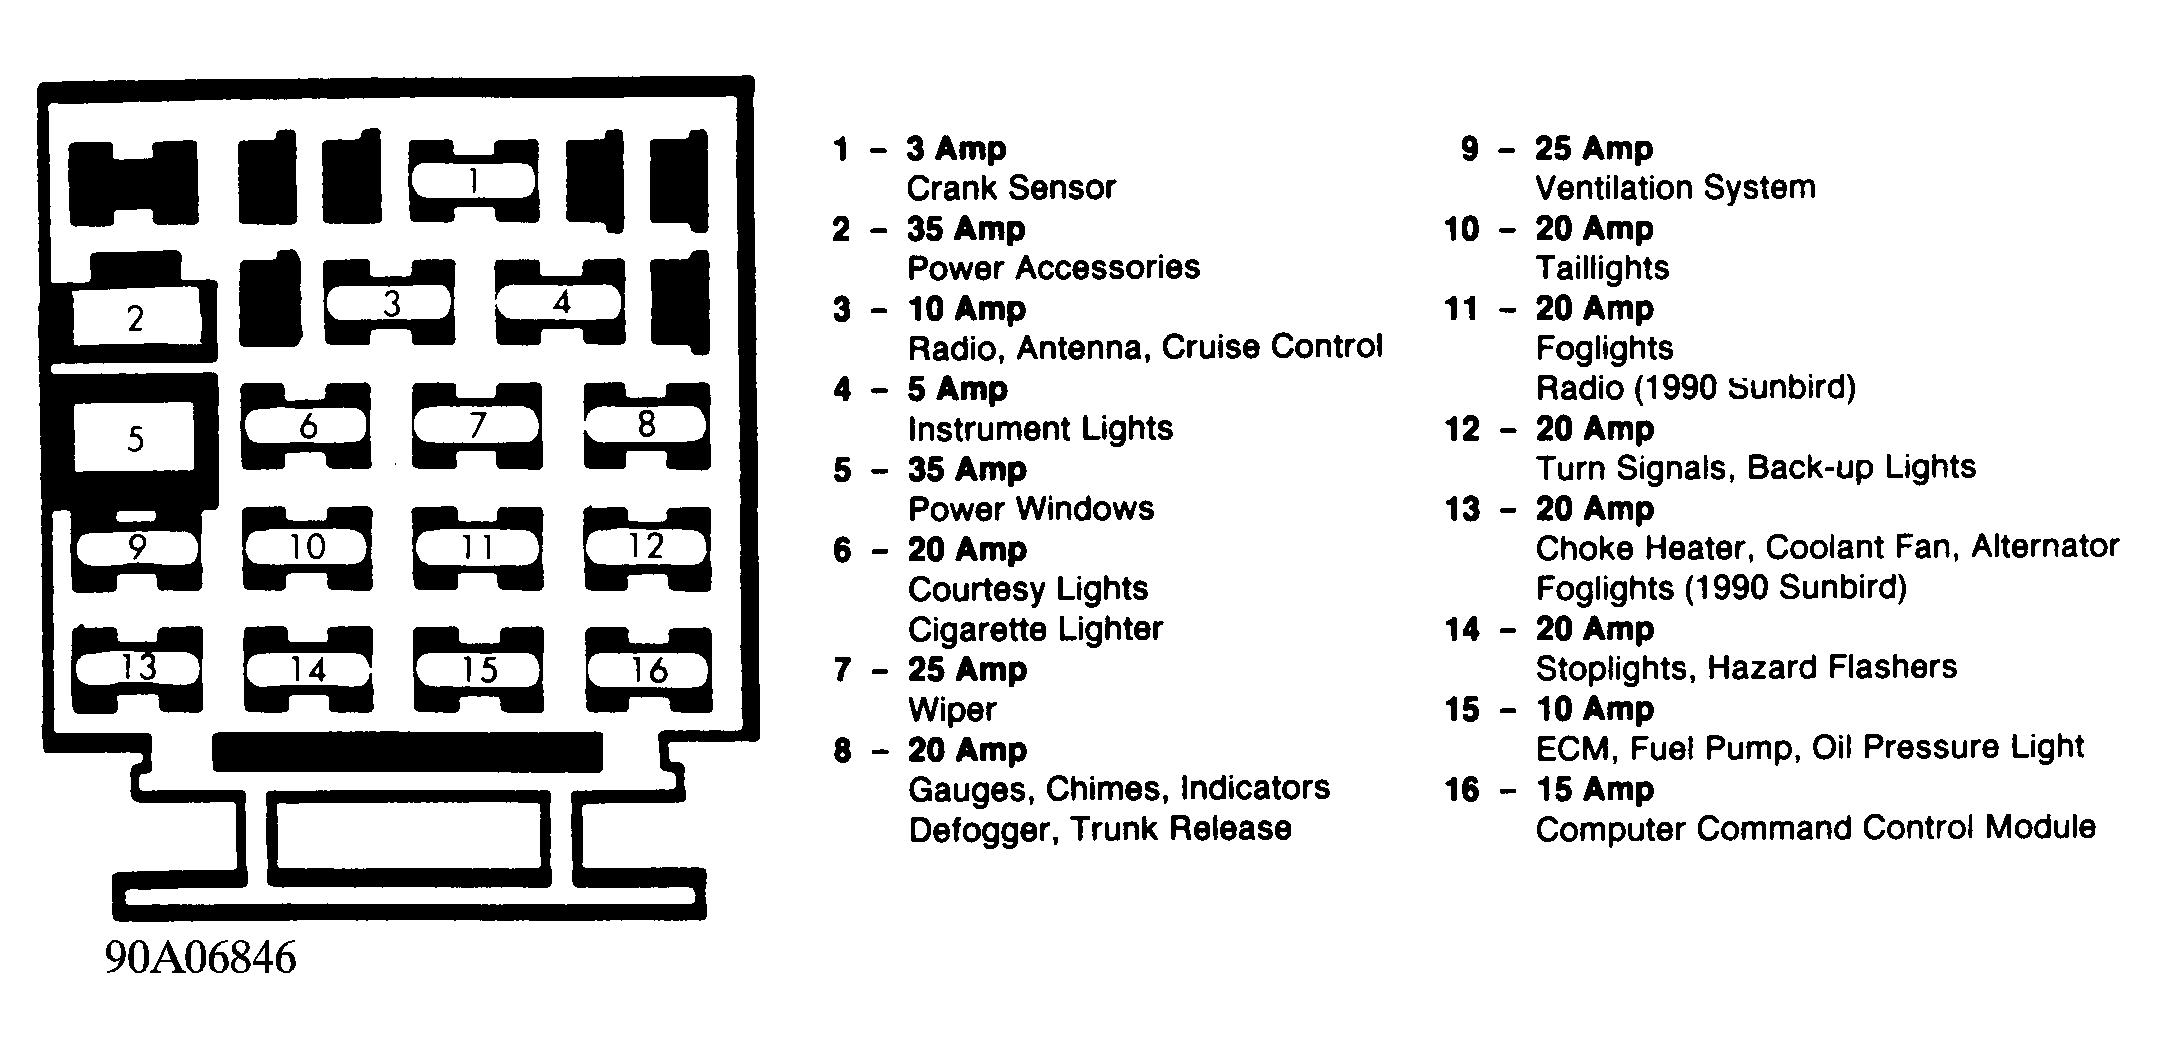 Chevrolet Cavalier VL 1992 - Component Locations -  Fuse Panel Identification (Typical 1983-90 Models)